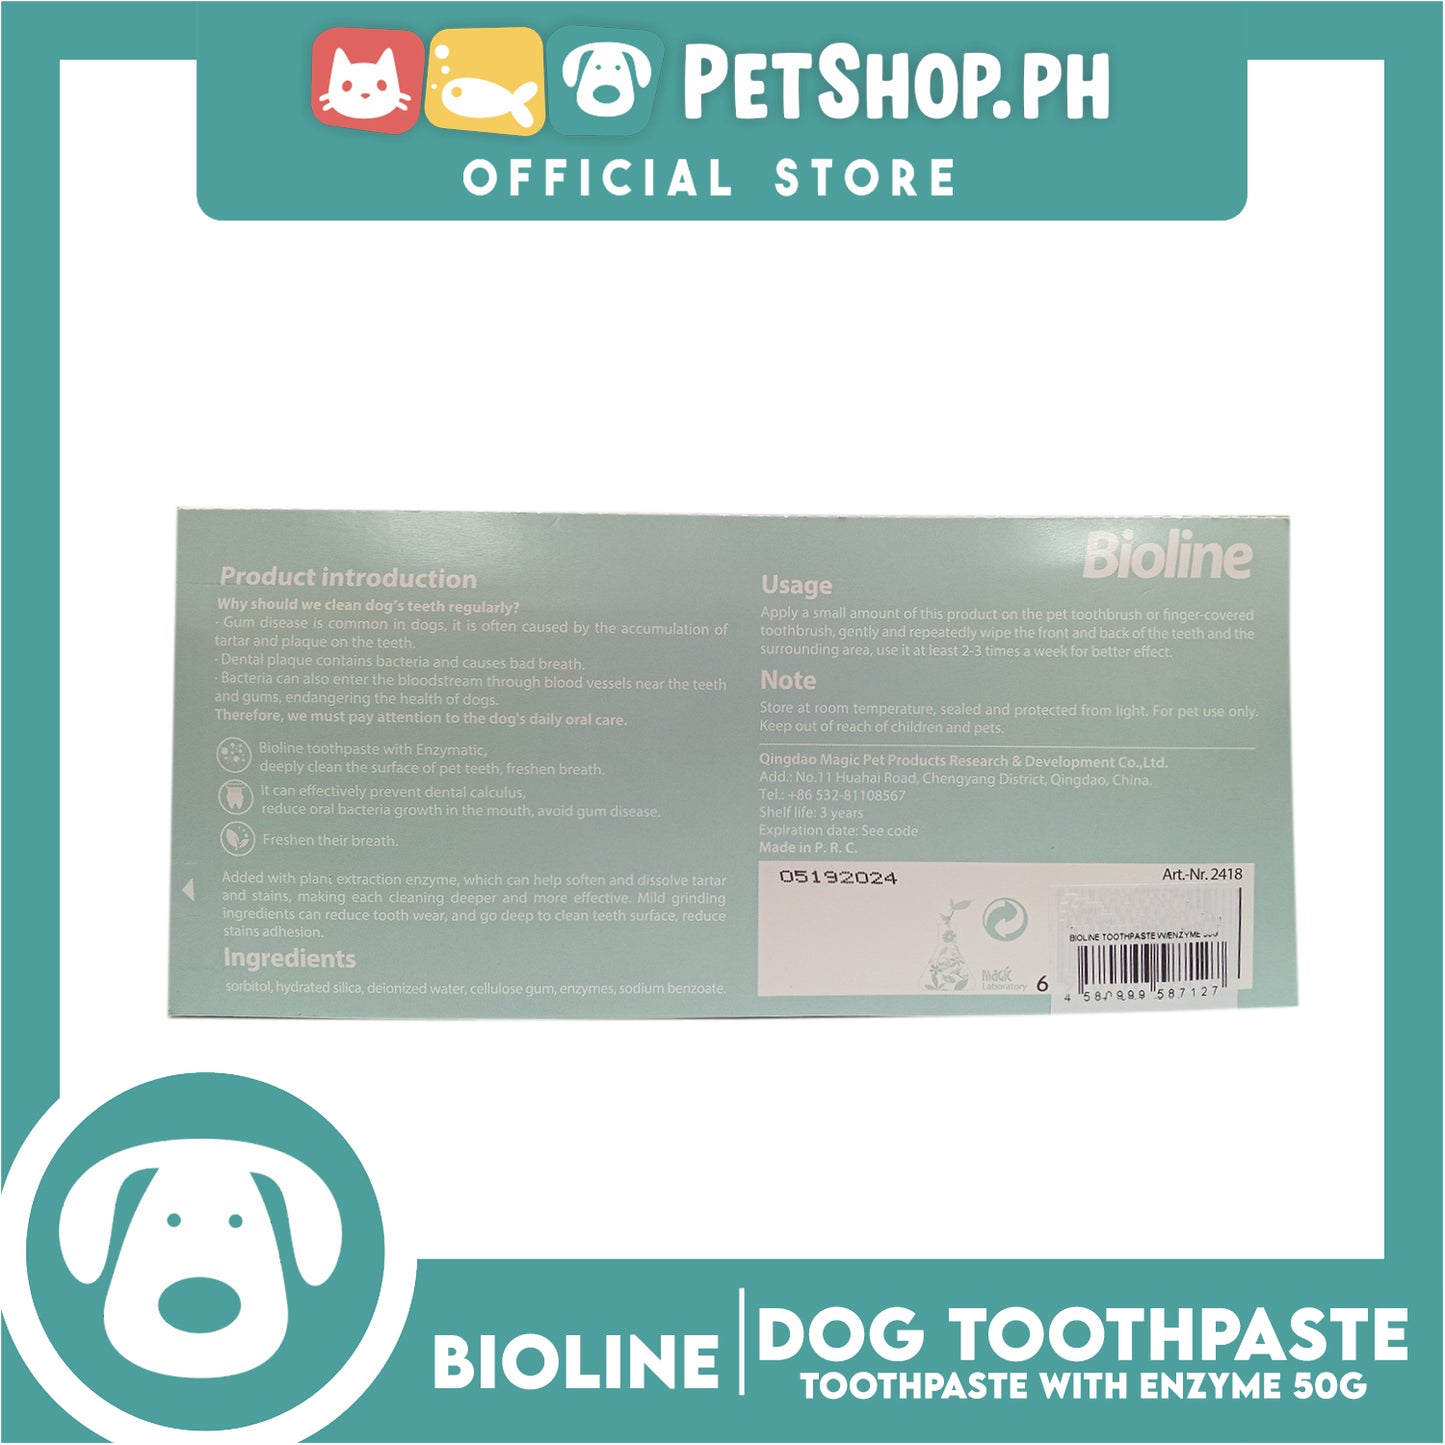 Bioline Toothpaste With Enzyme 50g For Pets Use Only